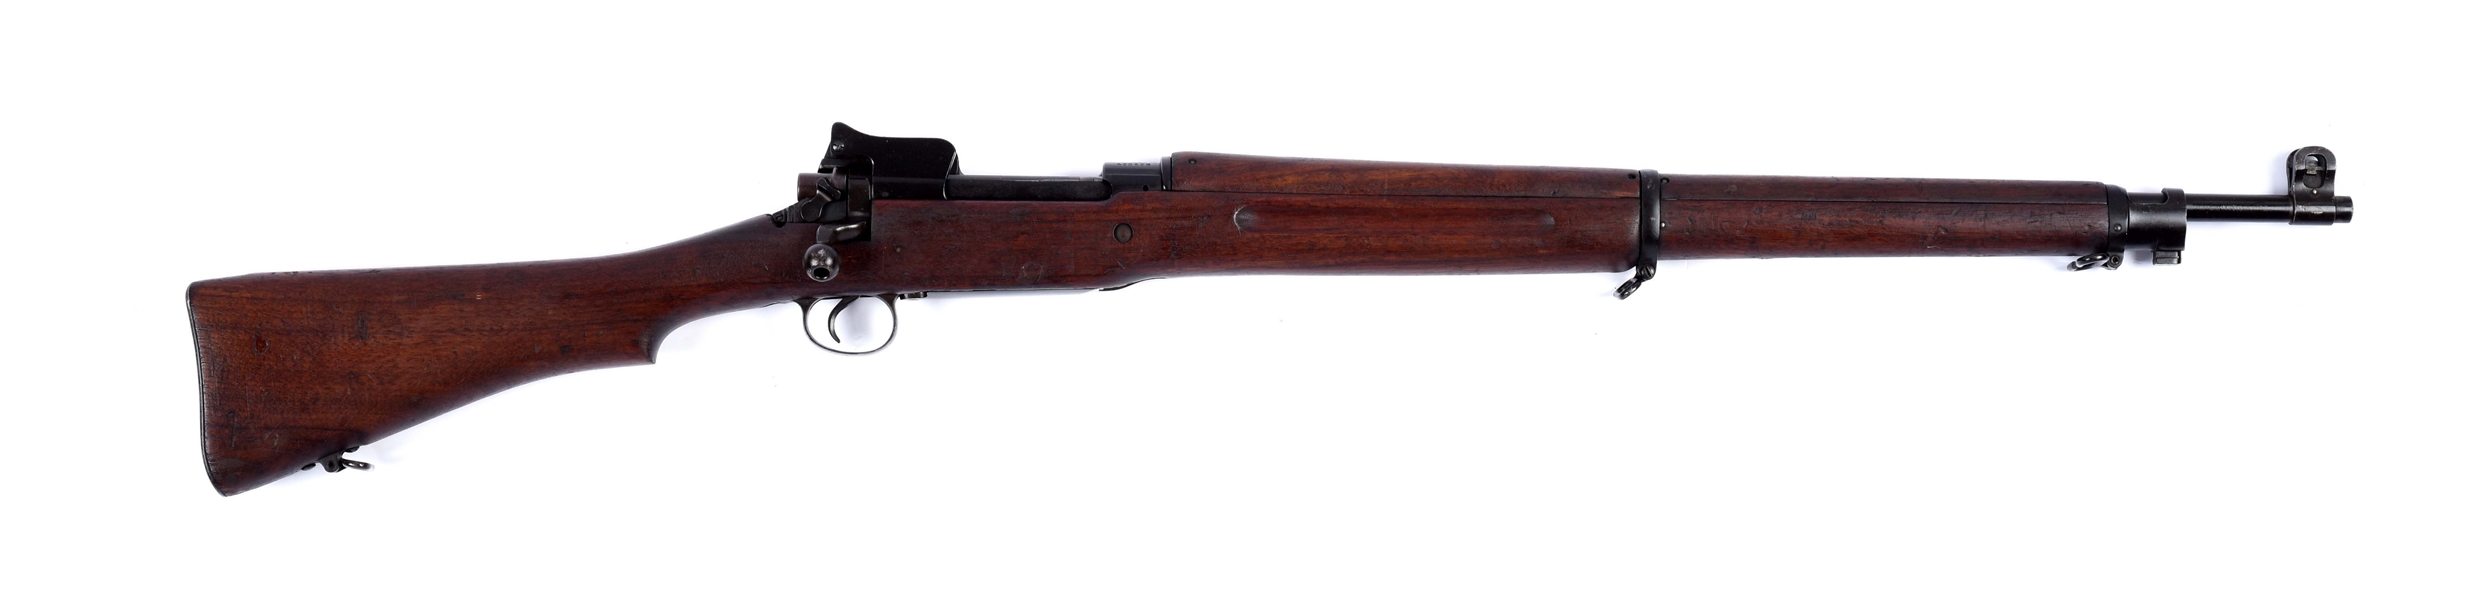 (C) WINCHESTER MODEL 1917 US BOLT ACTION MILITARY RIFLE.